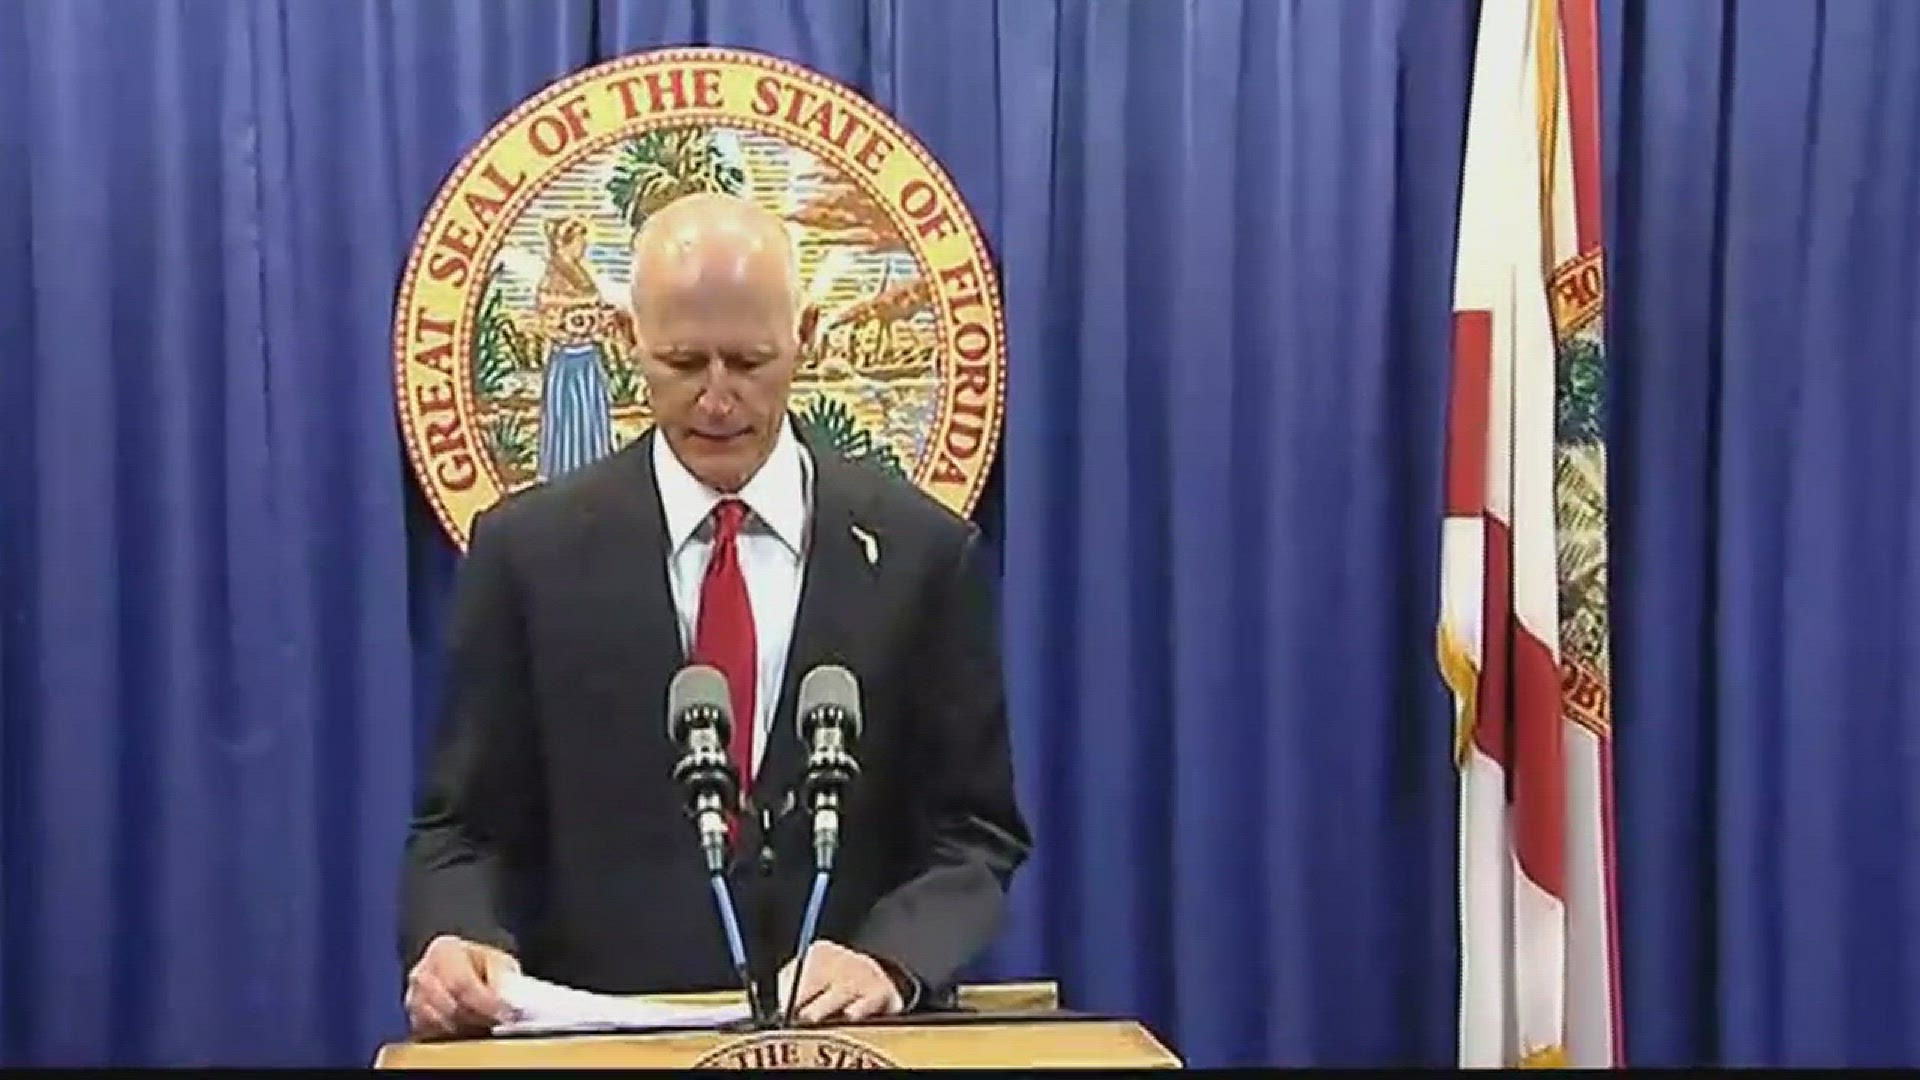 Gov. Rick Scott explains what he aims to do to stop gun violence and mass shootings in Florida.